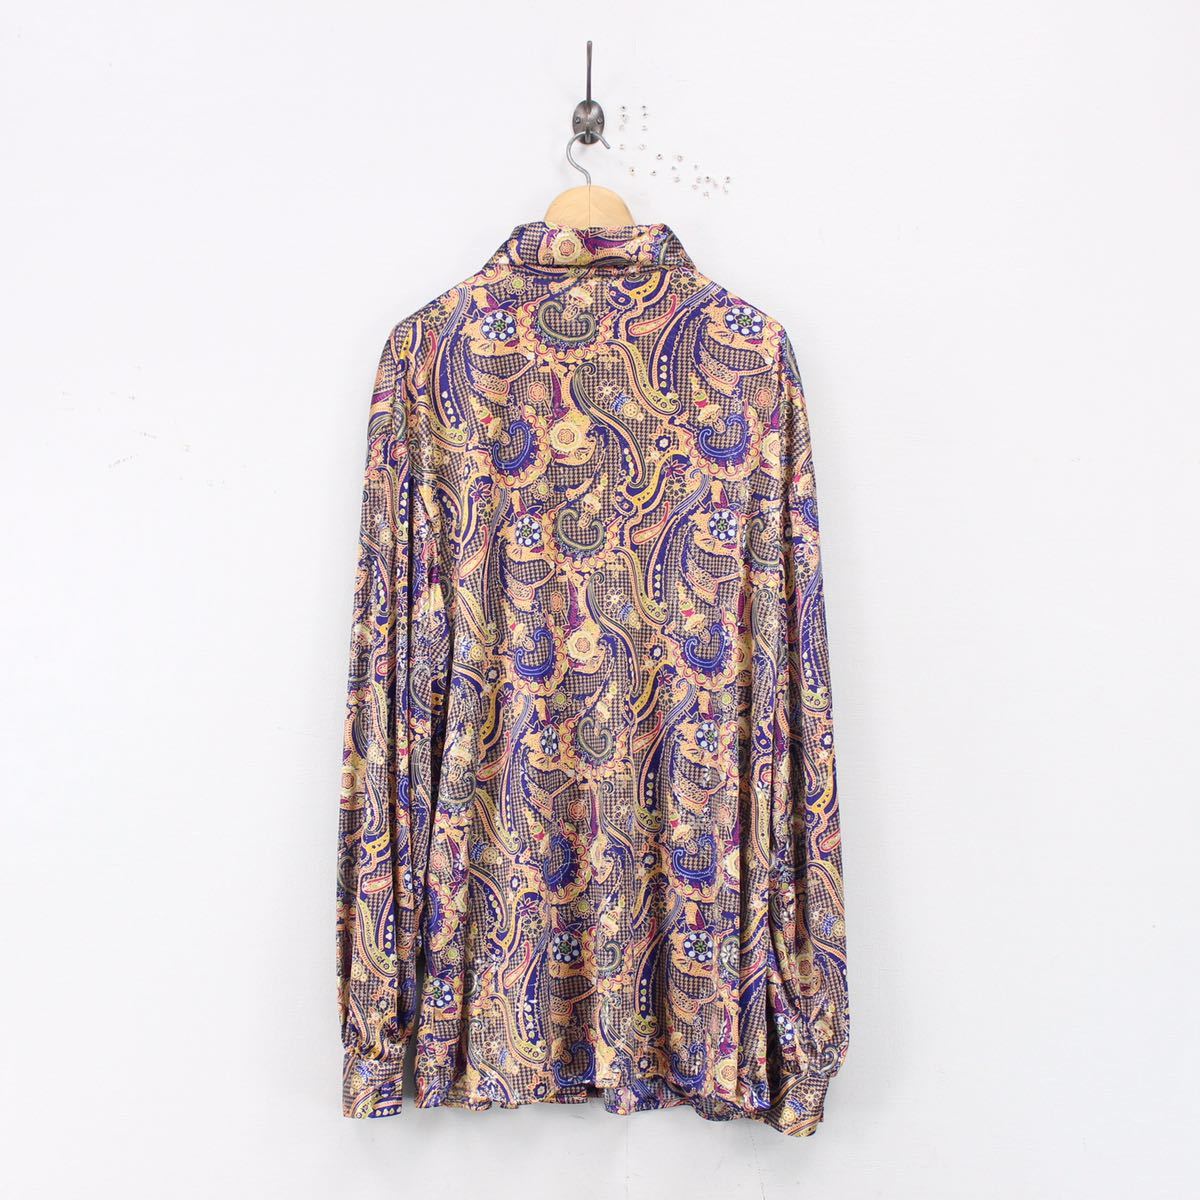 USA VINTAGE orare PAISLEY PATTERNED DESIGN SHIRT MADE IN USA/アメリカ古着ペイズリー柄デザインシャツ_画像6